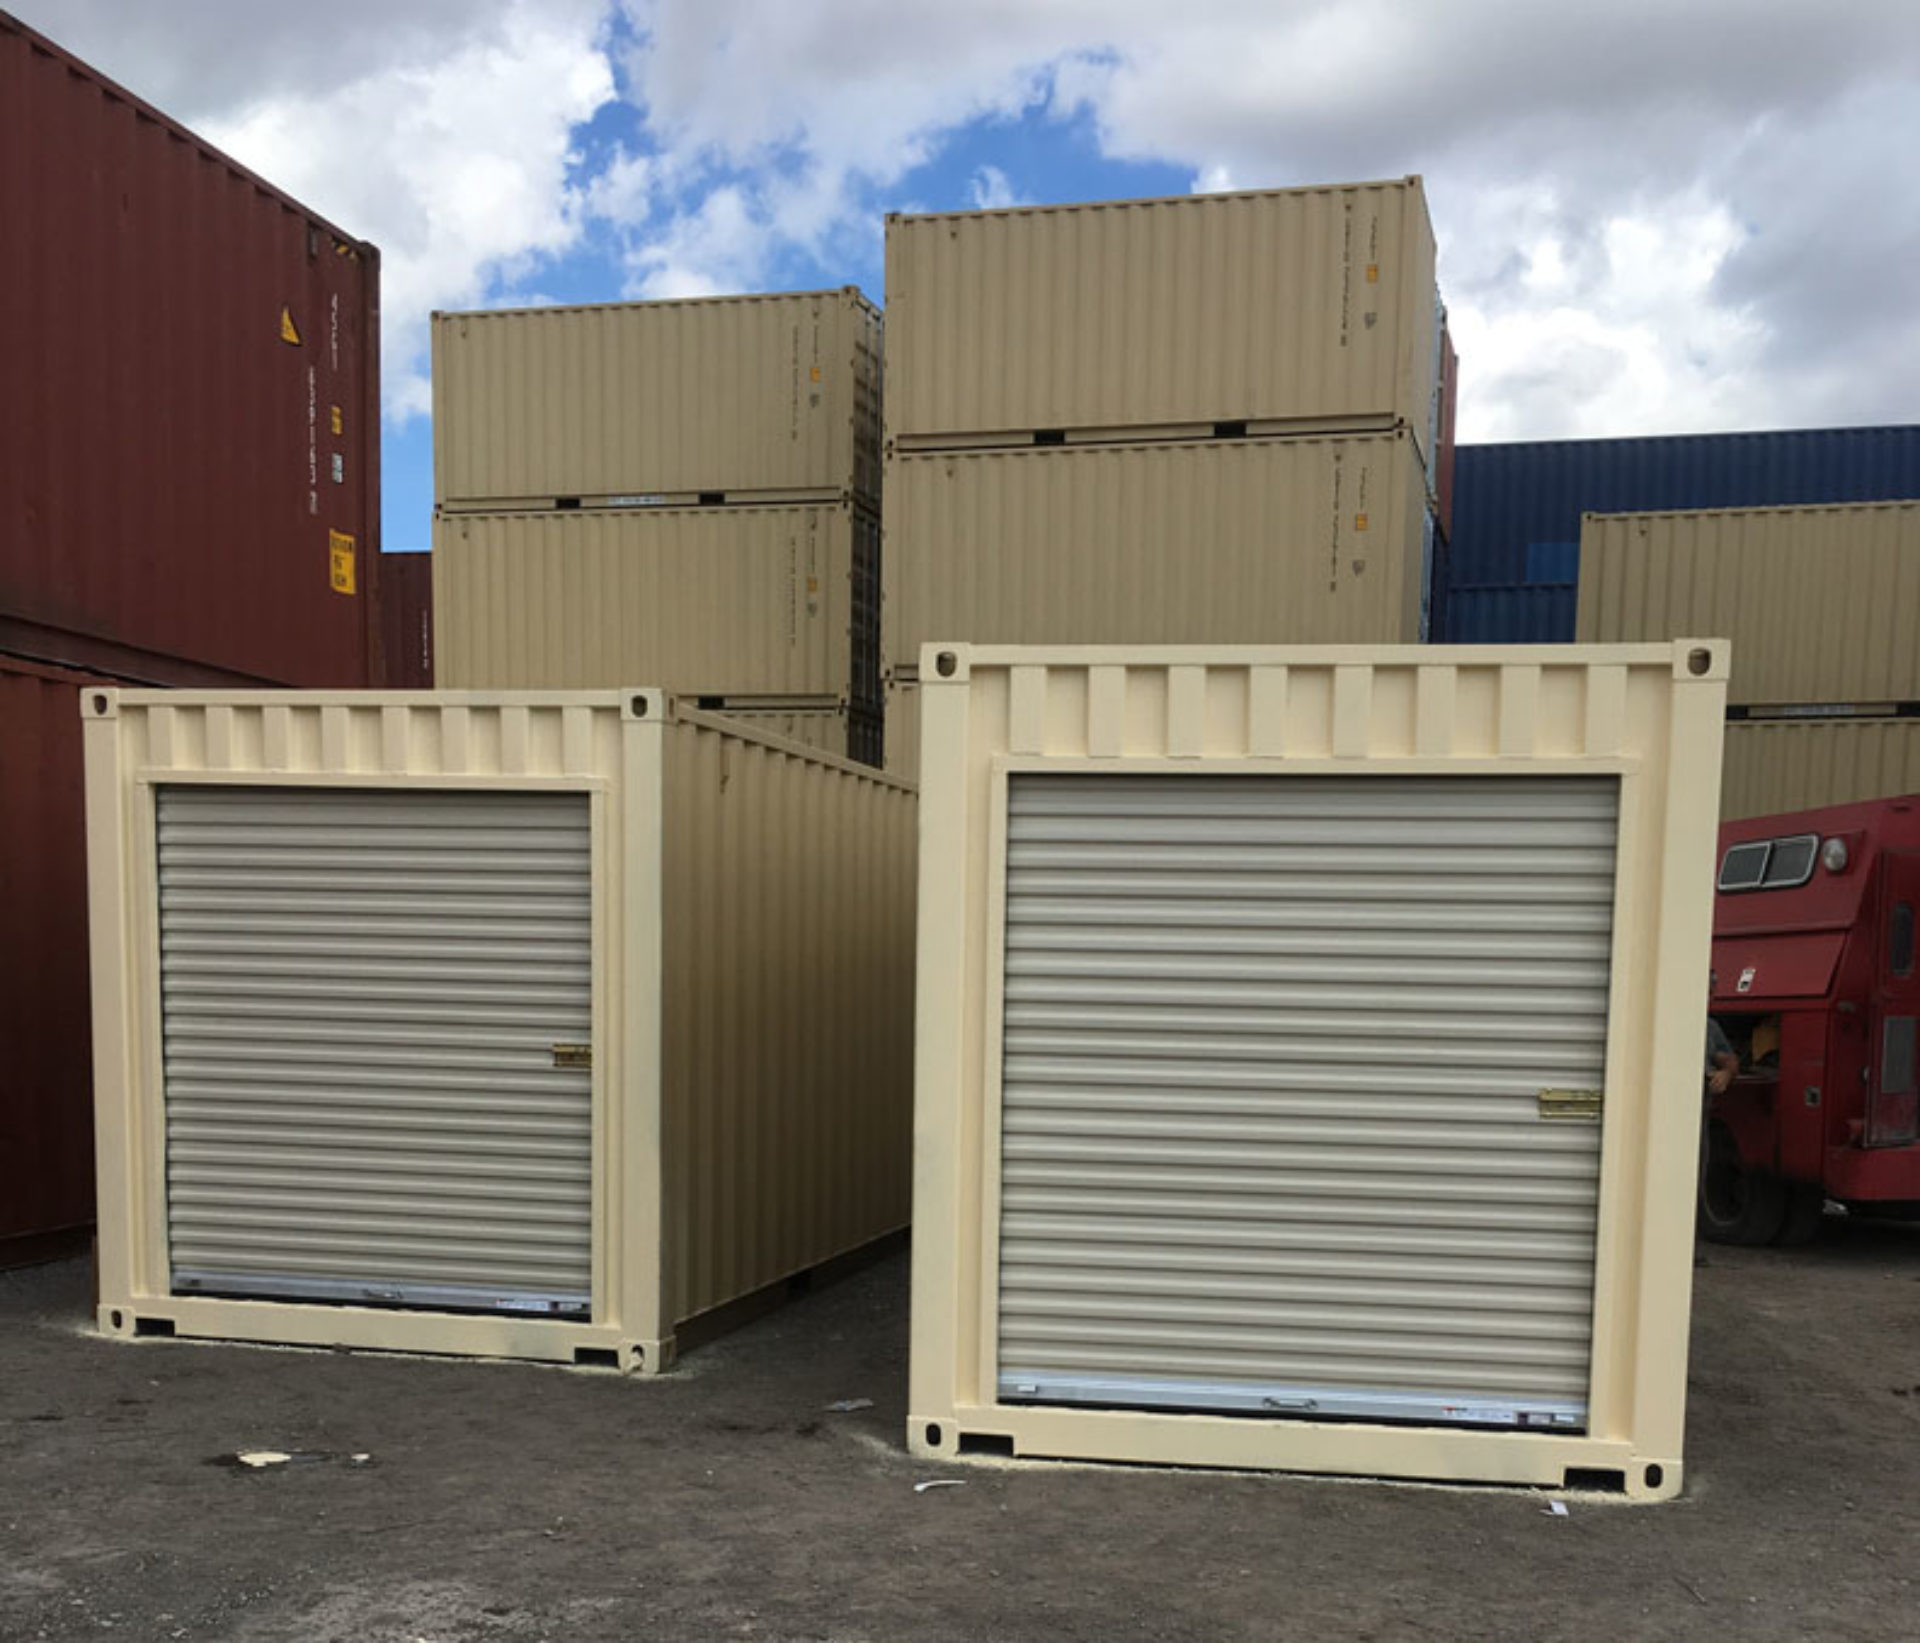 Roll-Up Doors For Shipping Containers